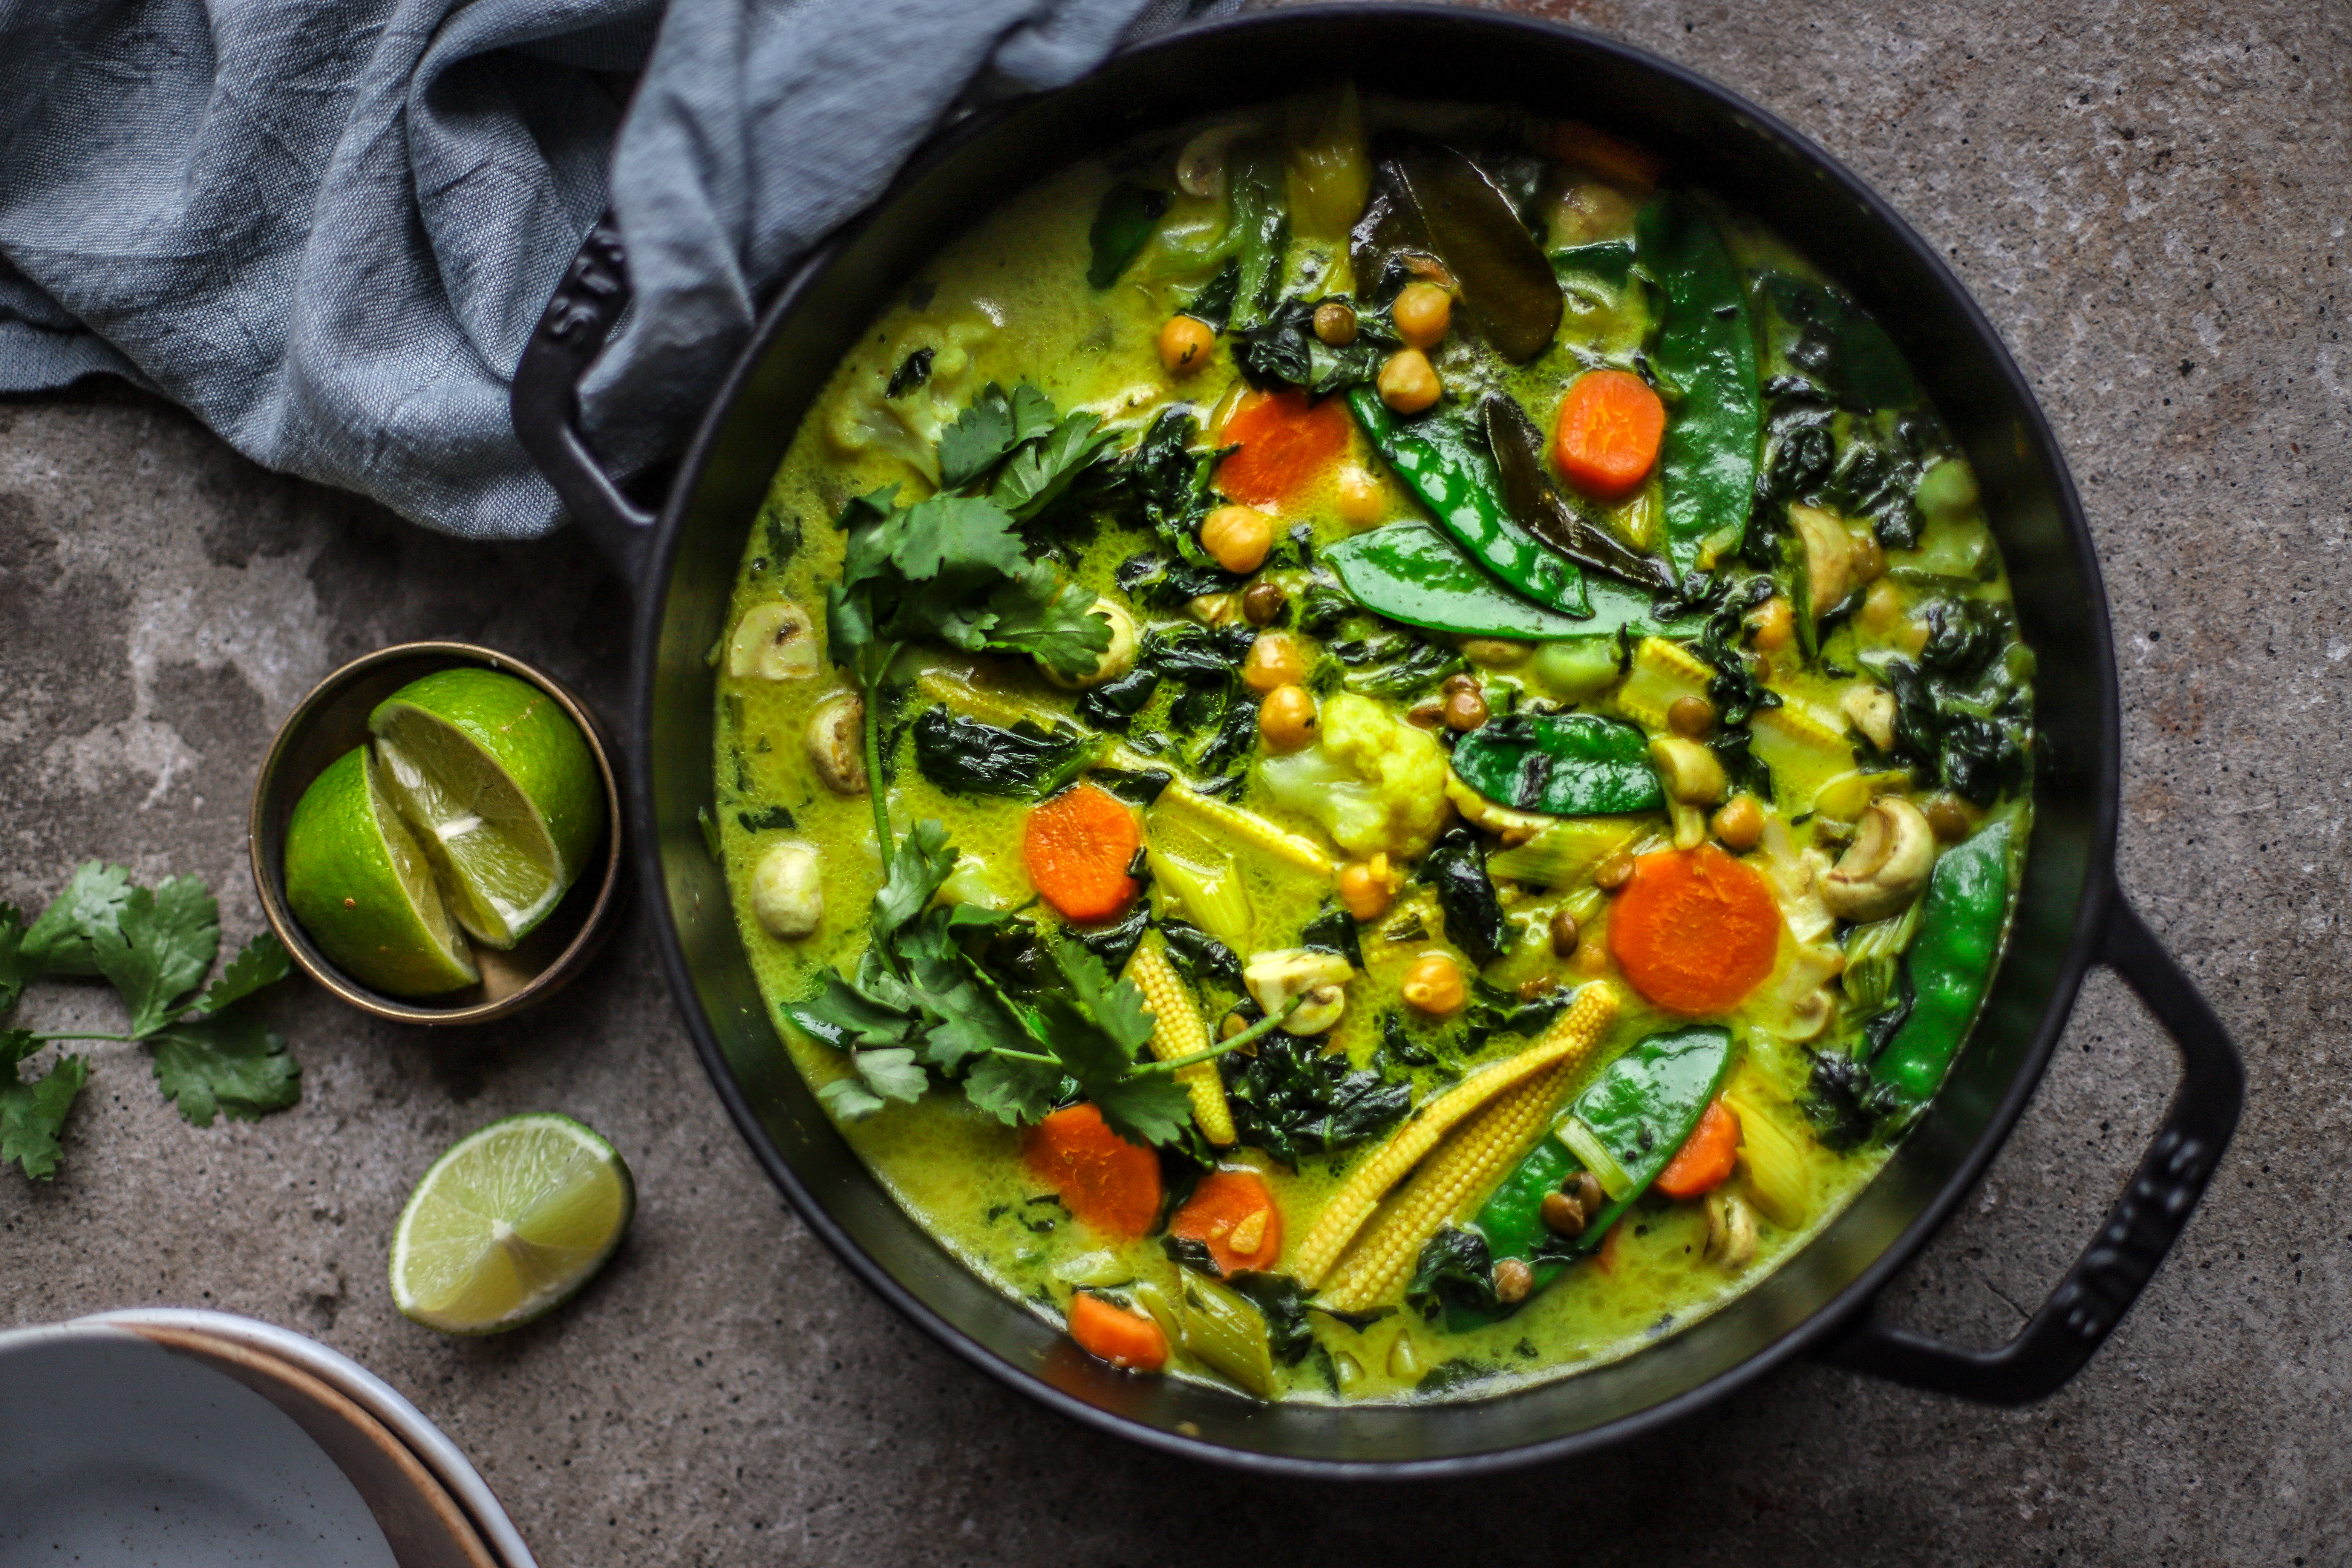 This weekday #vegan #Thai green #curry #recipe takes advantage of the goodness and convenience of frozen #vegetables and pulses. Fibre-rich, nutritious and utterly delicious.